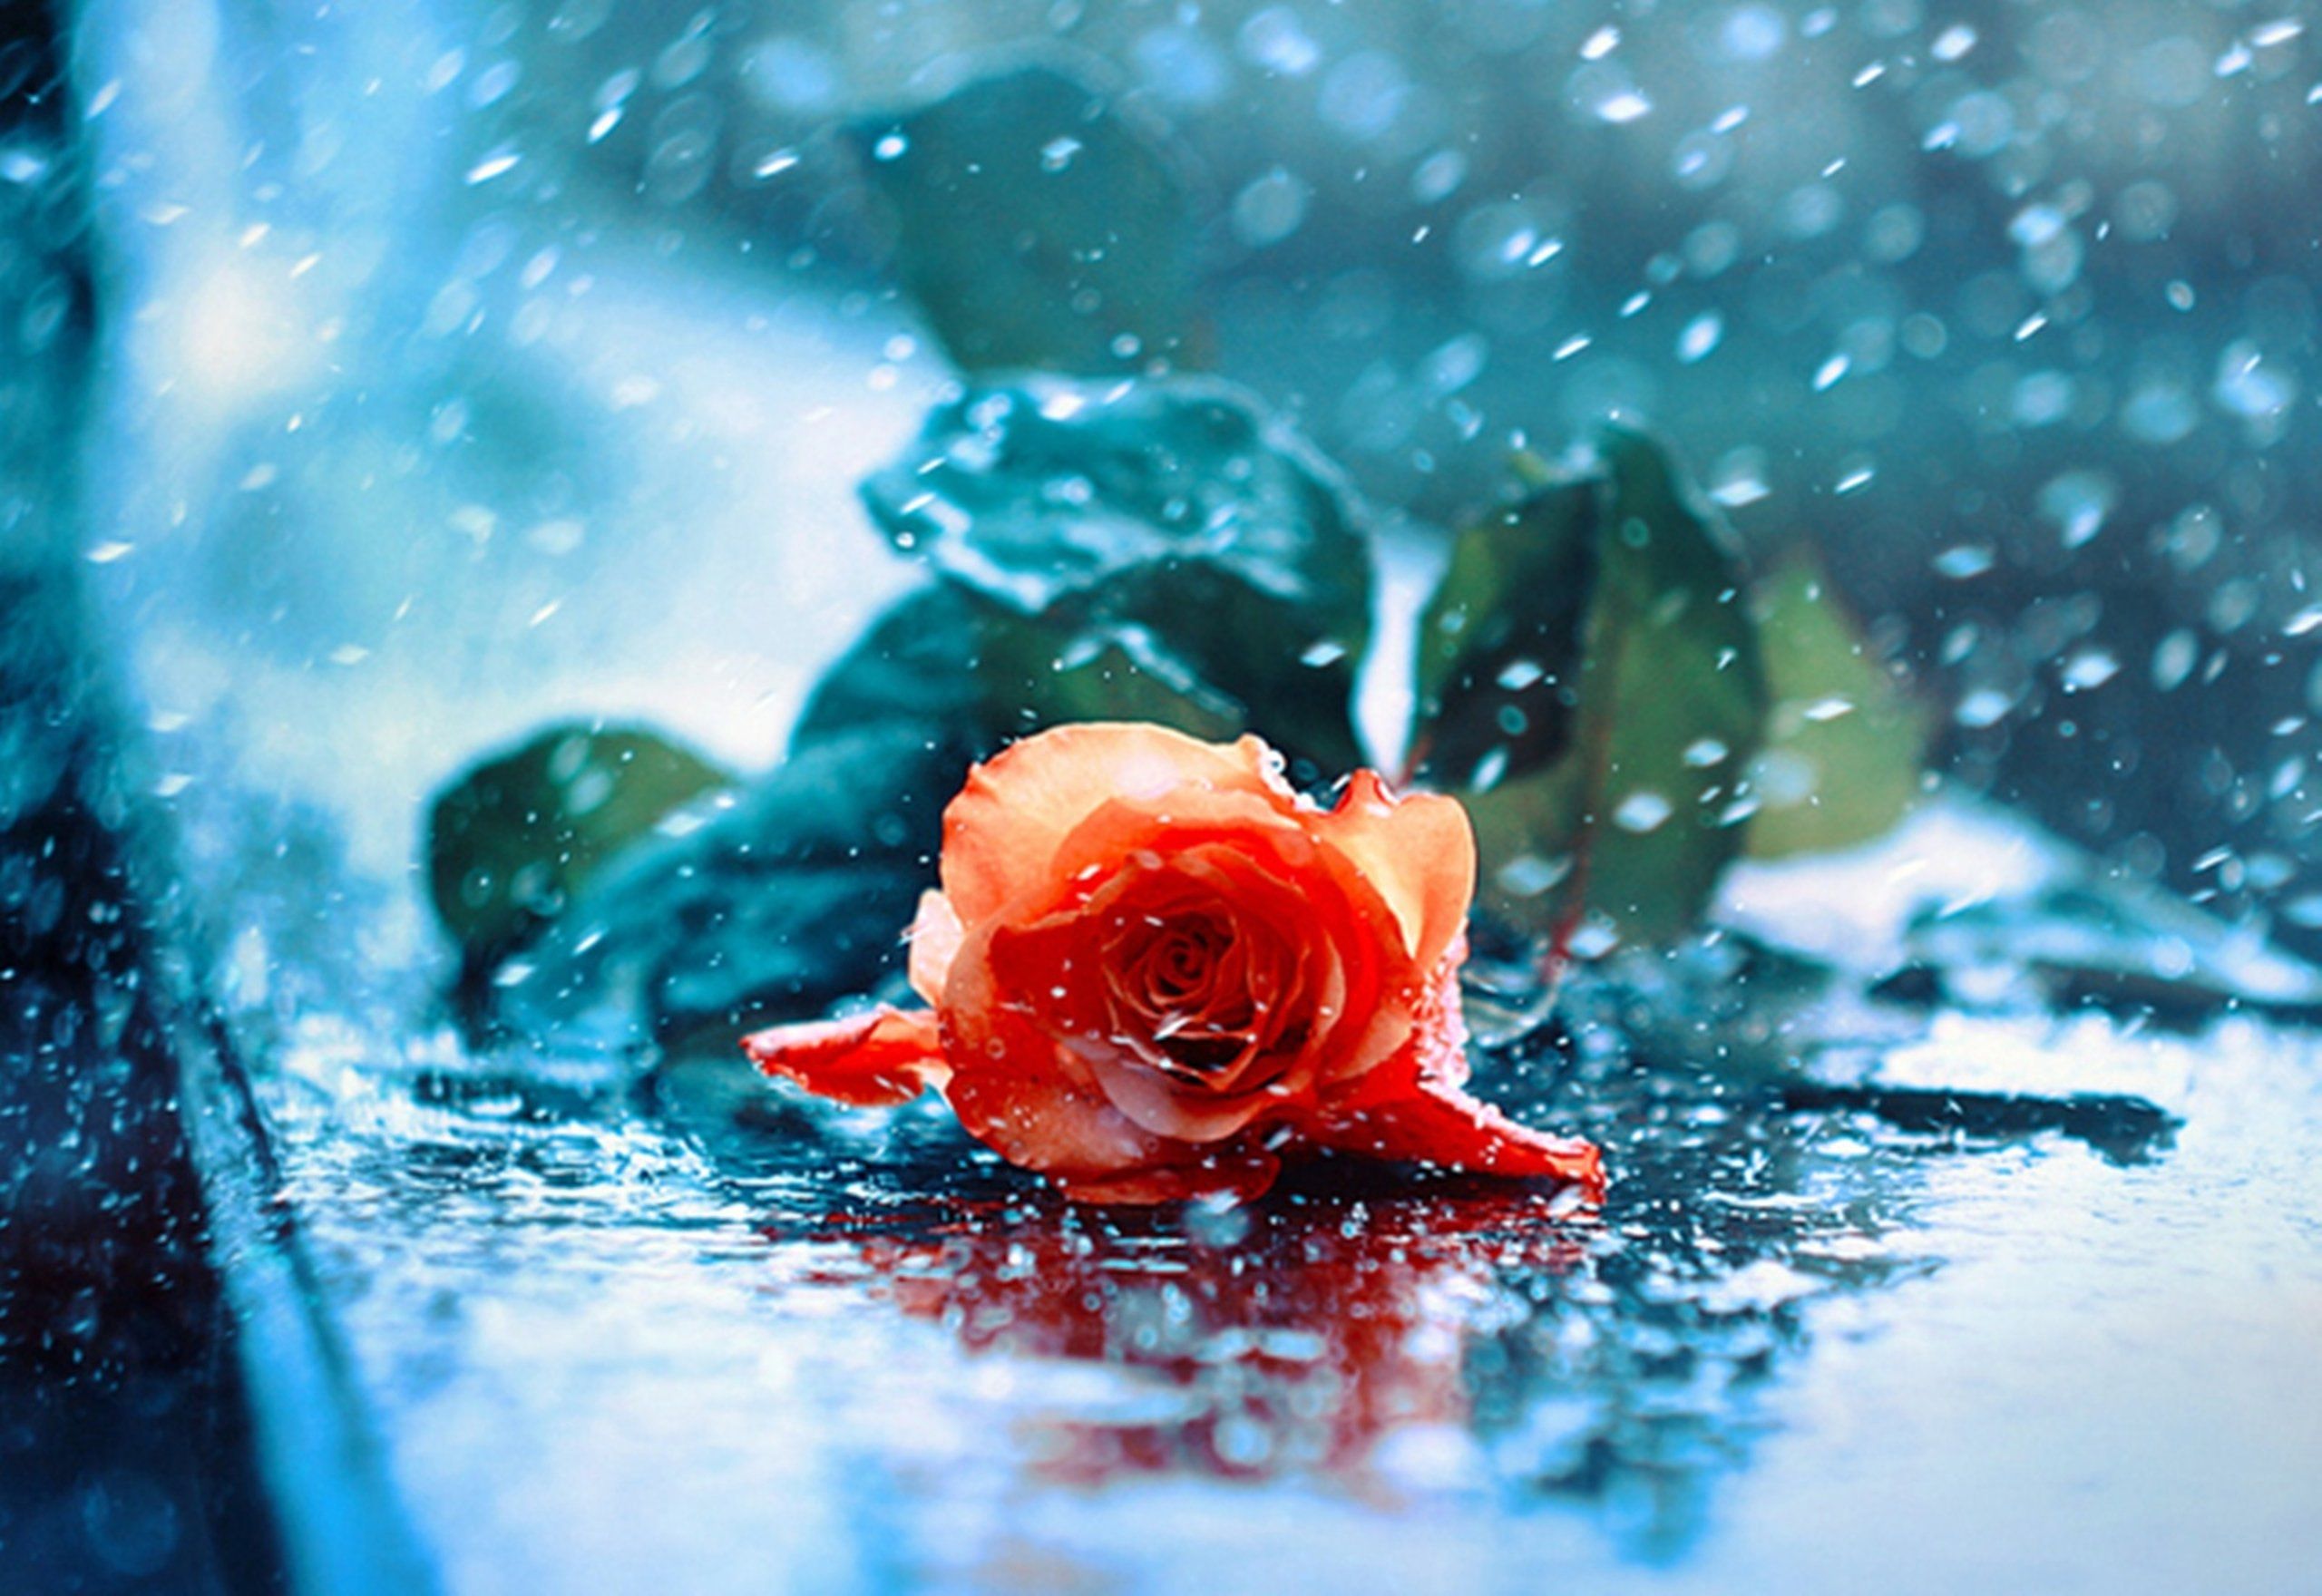 water, Drops, Red, Red, Rose, Wet, Rose, Rose, Beauty, Beautiful, Rose Wallpaper HD / Desktop and Mobile Background